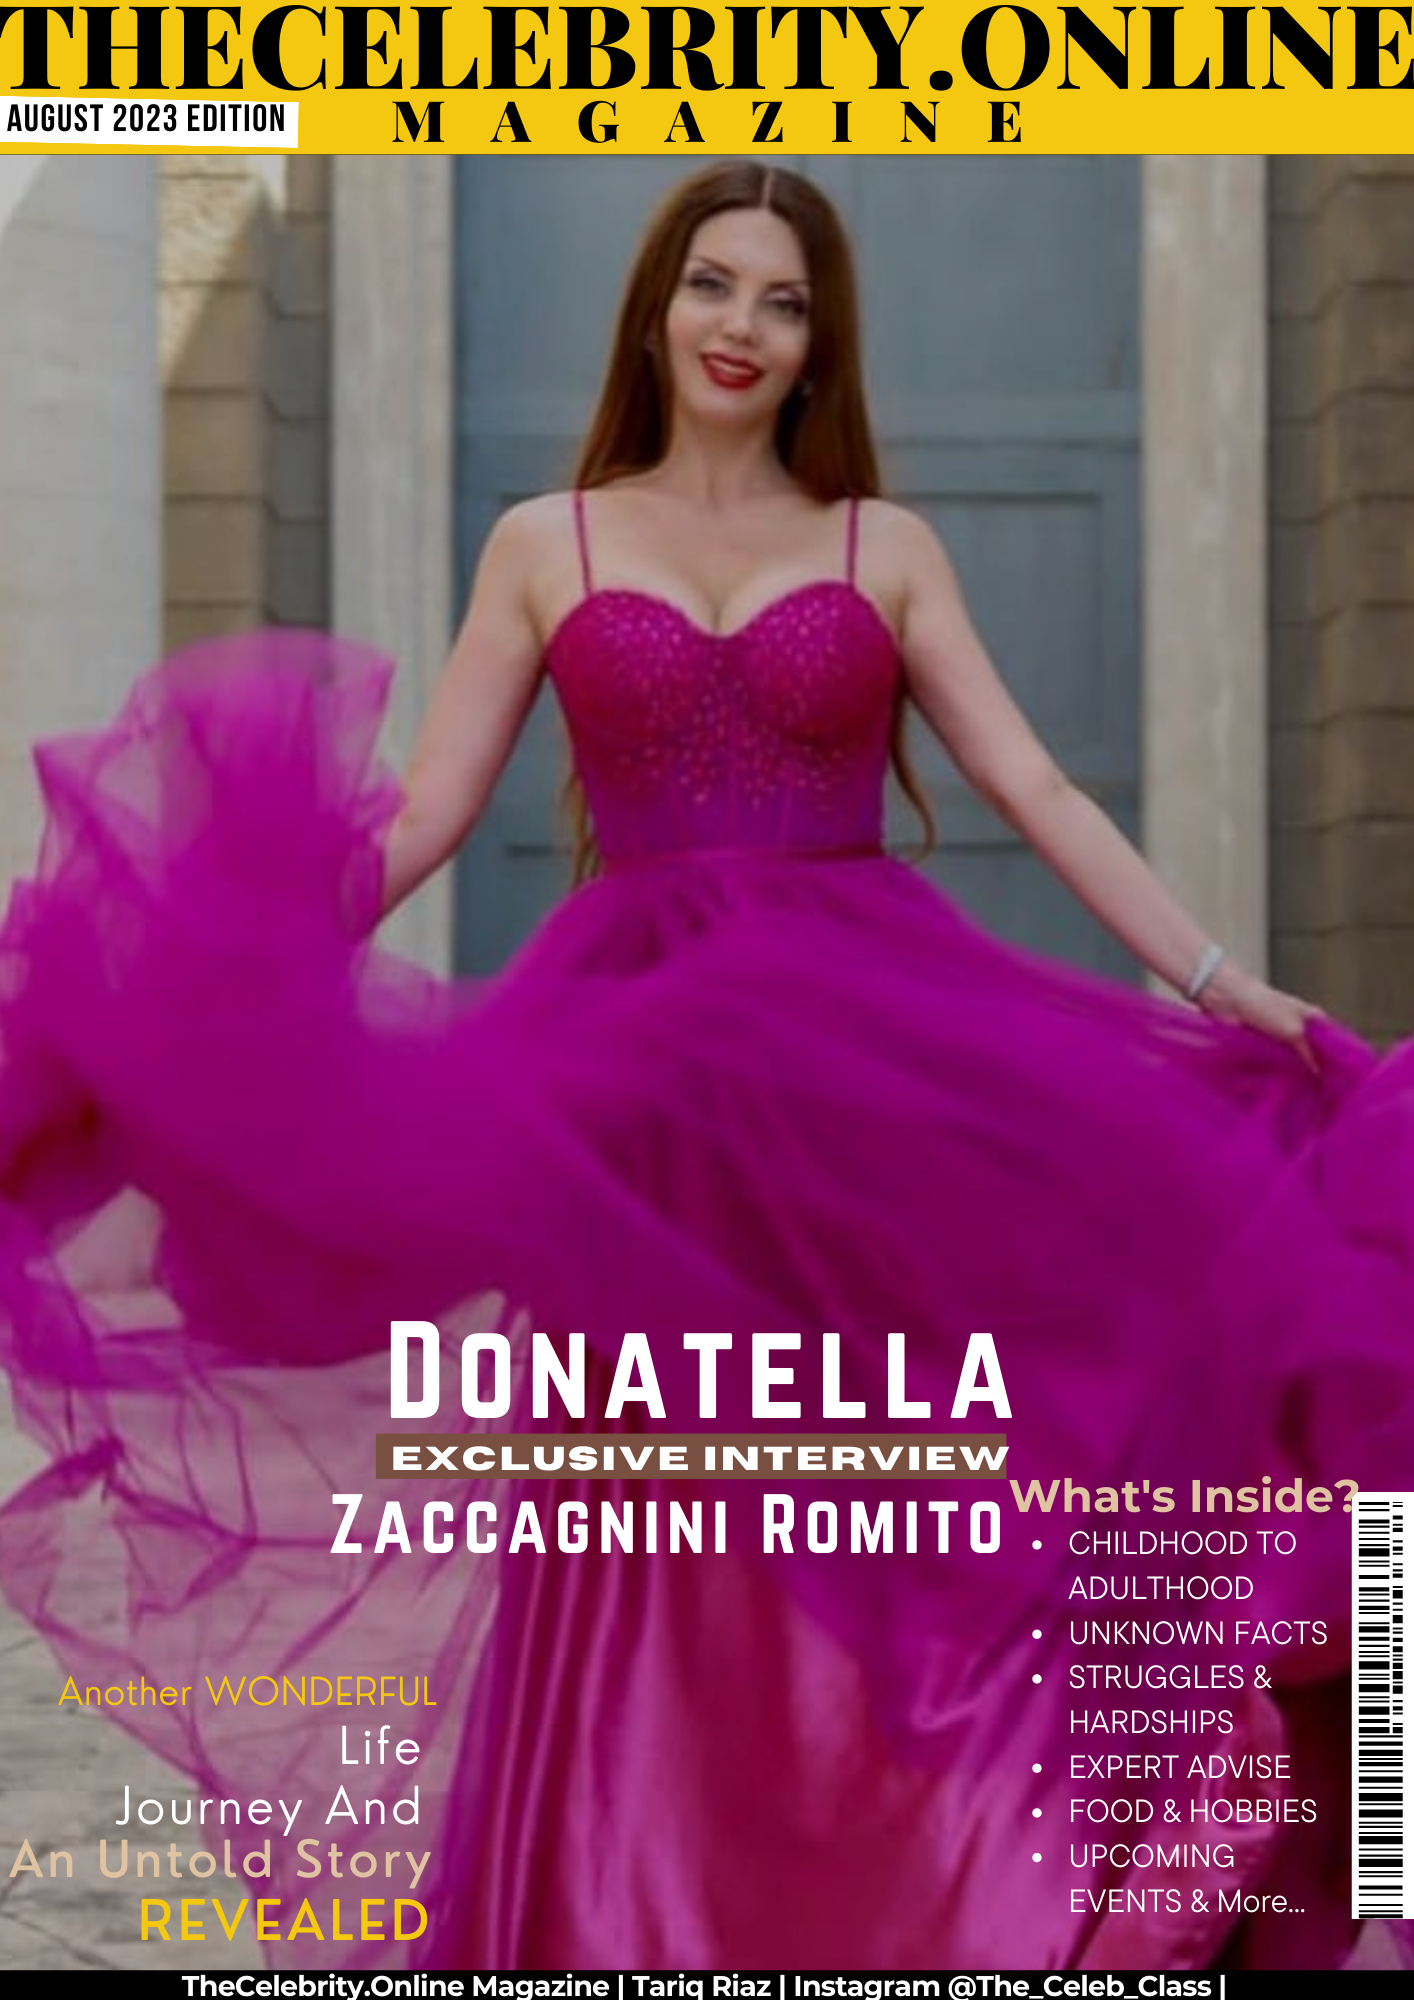 Donatella Zaccagnini Romito Exclusive Interview – ‘Life Is Now, Enjoy It To The Fullest!’